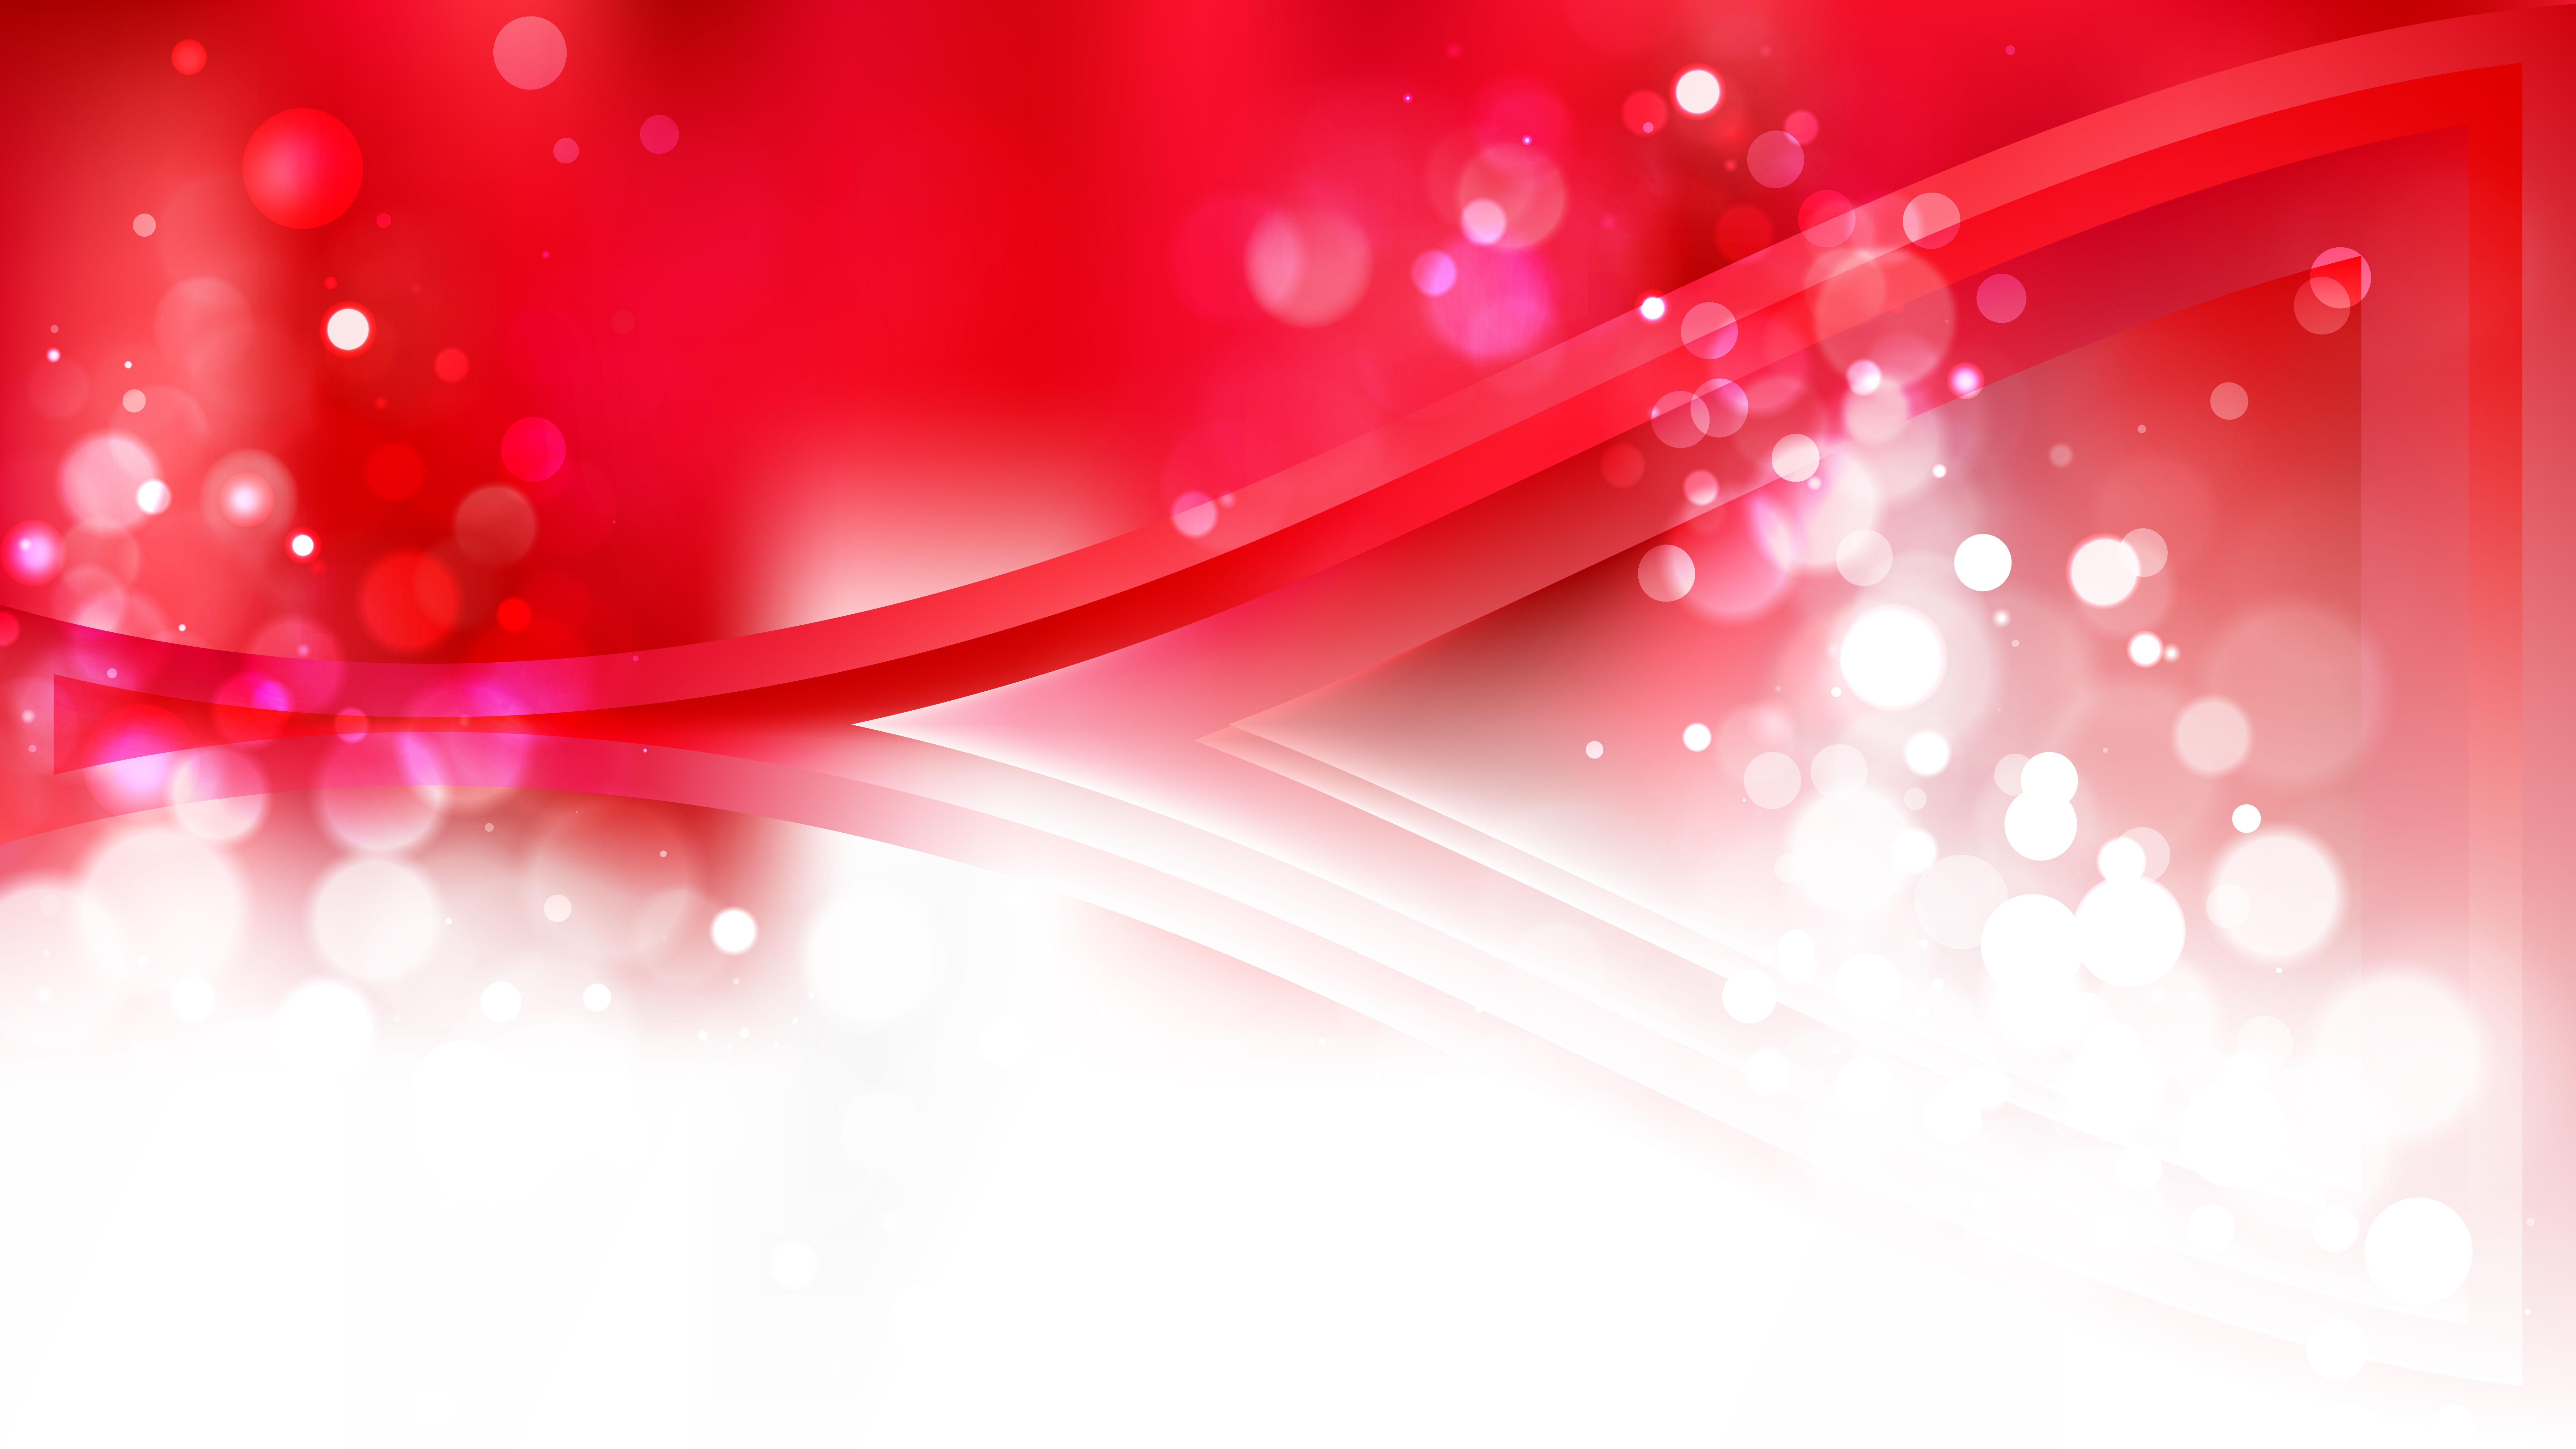 Free Abstract Red and White Blur Lights Background Image